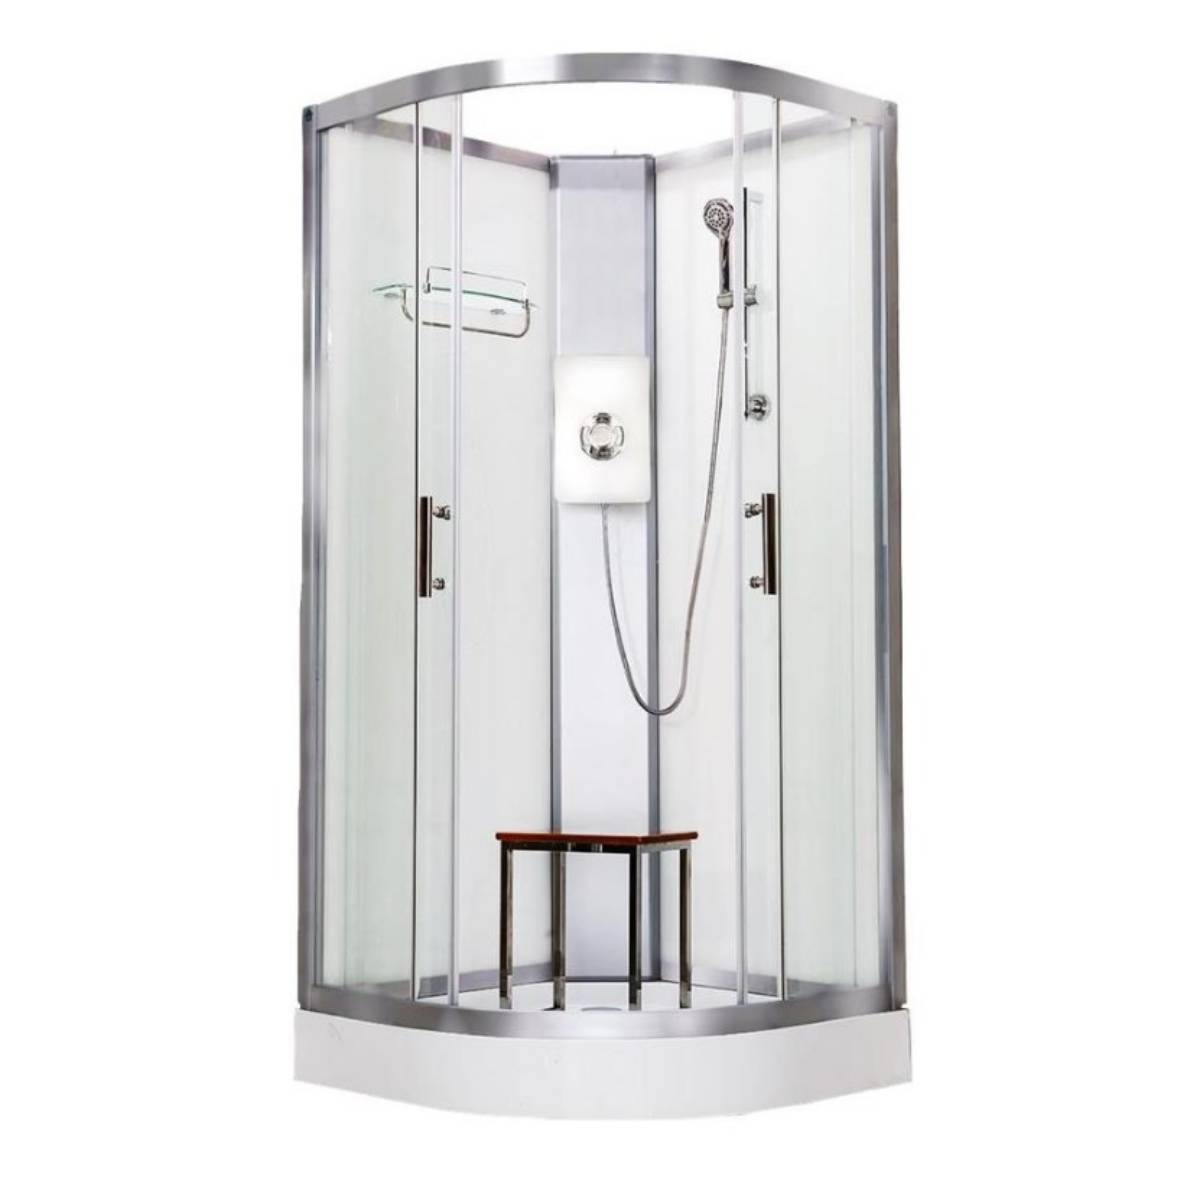 Vidalux Pure Electric 800mm Shower Cabin White - Lux White 9.5KW (11639)